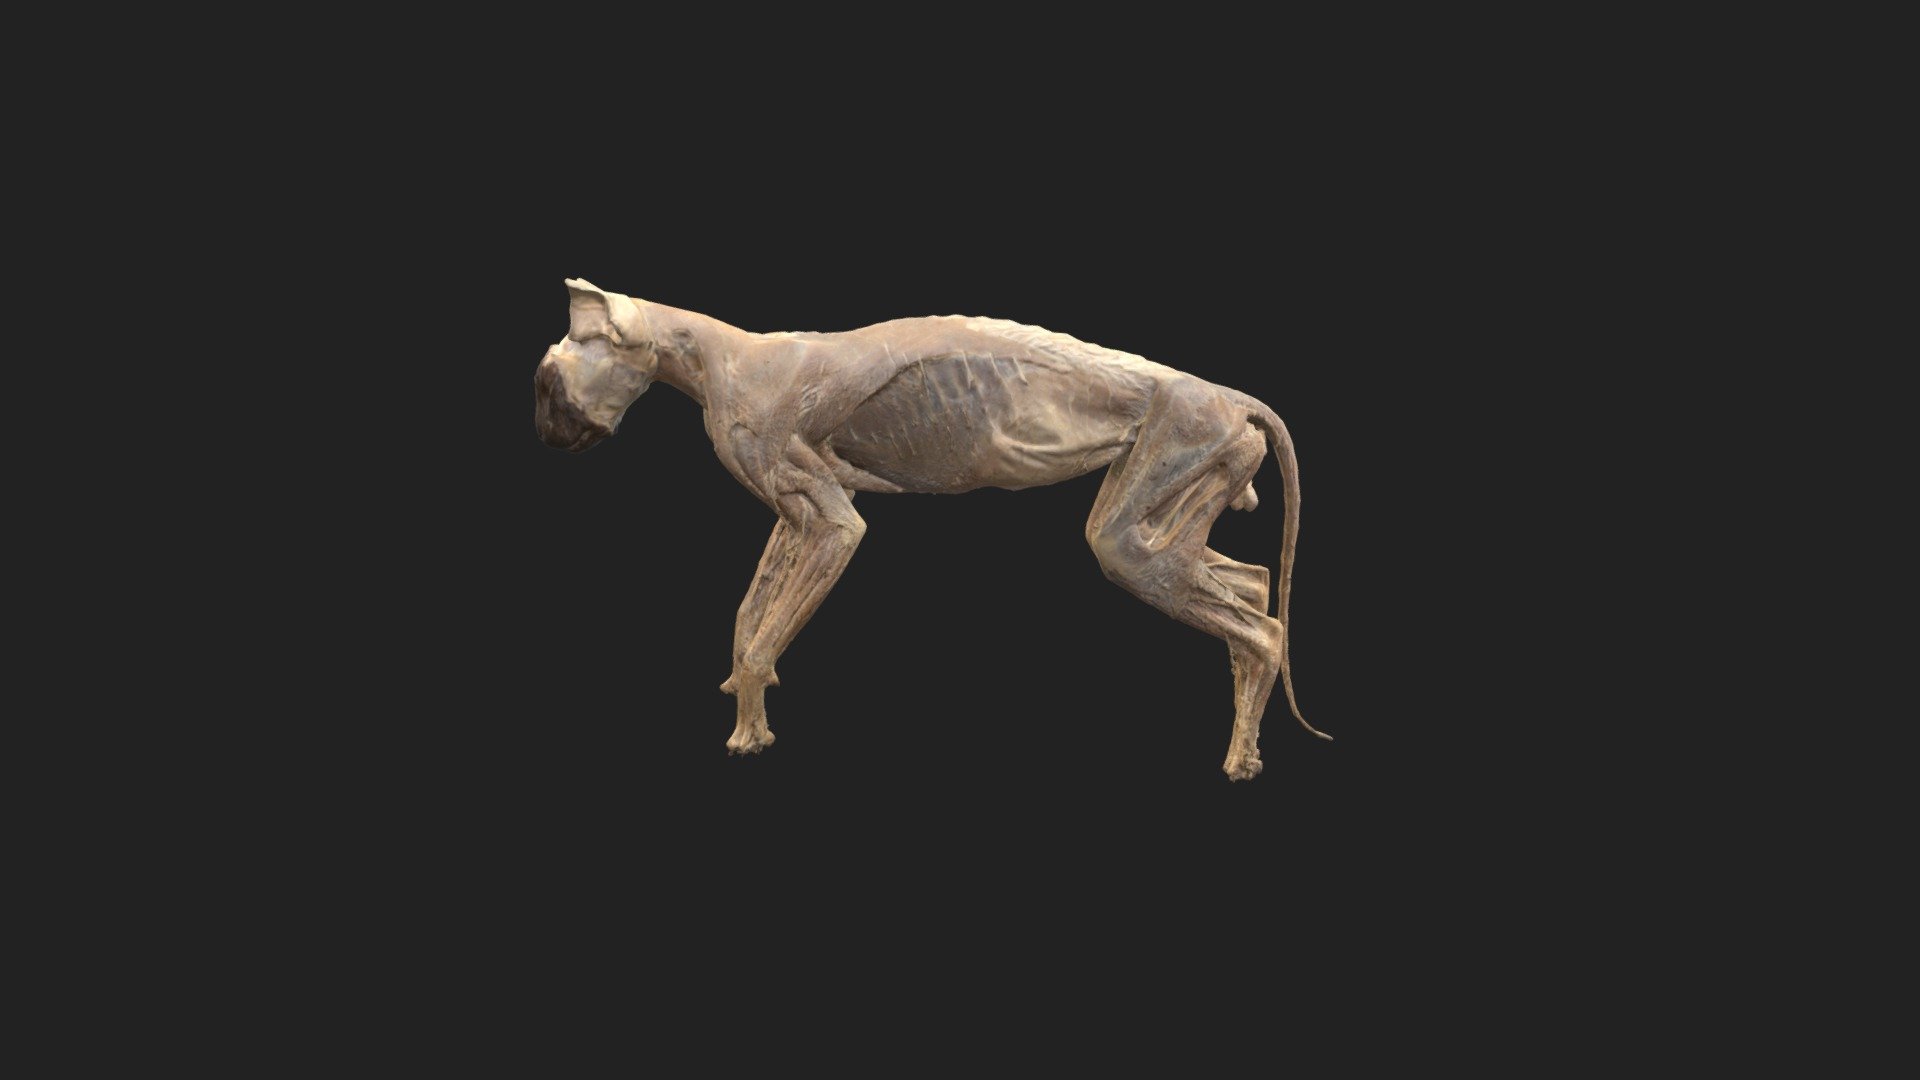 a complete presentation of a male cat

size of specimen: 426.2 x 263.6 x 89mm

3D scanning performed with the structured light scanners  &ldquo;Artec Leo